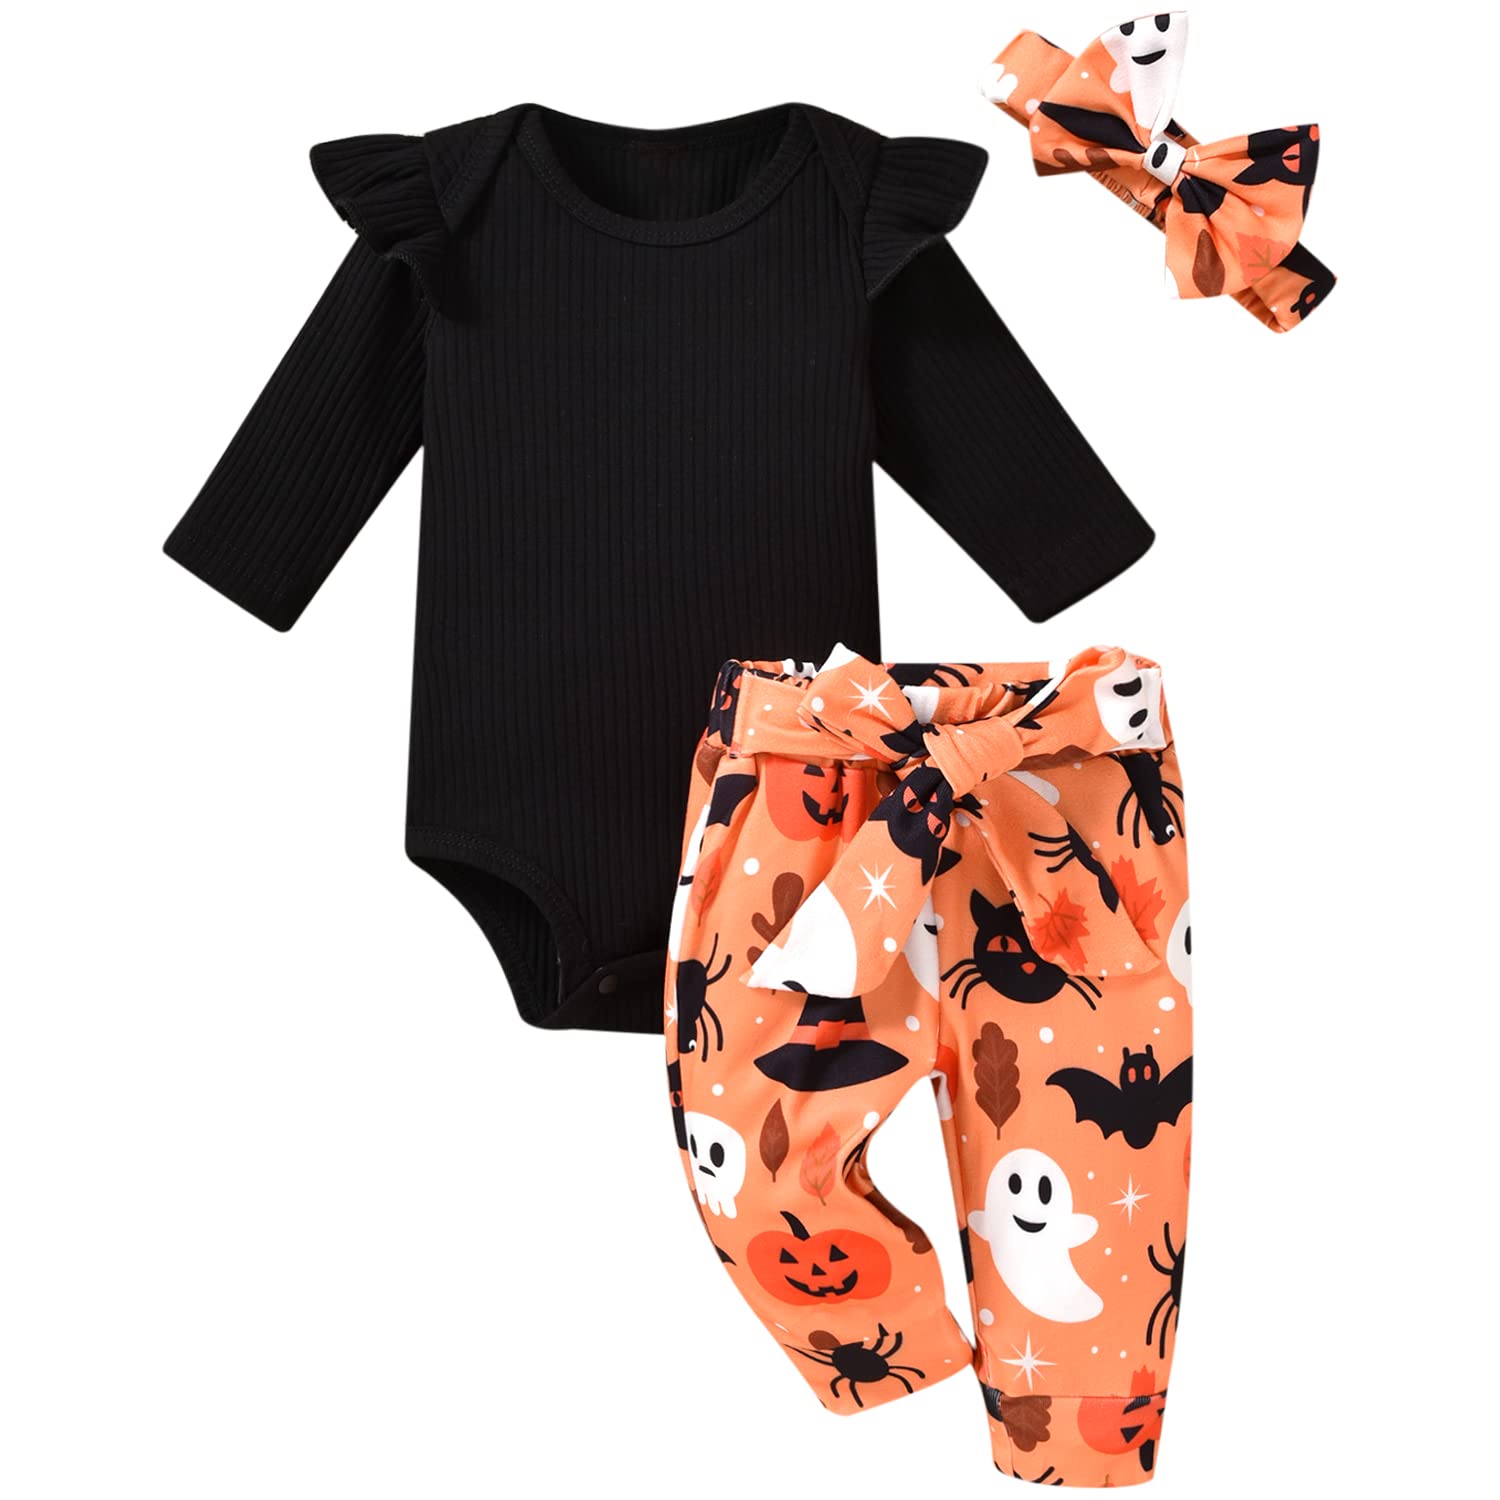 Aalizzwell Preemie Baby girls Halloween clothes ghost Outfits Premature Black